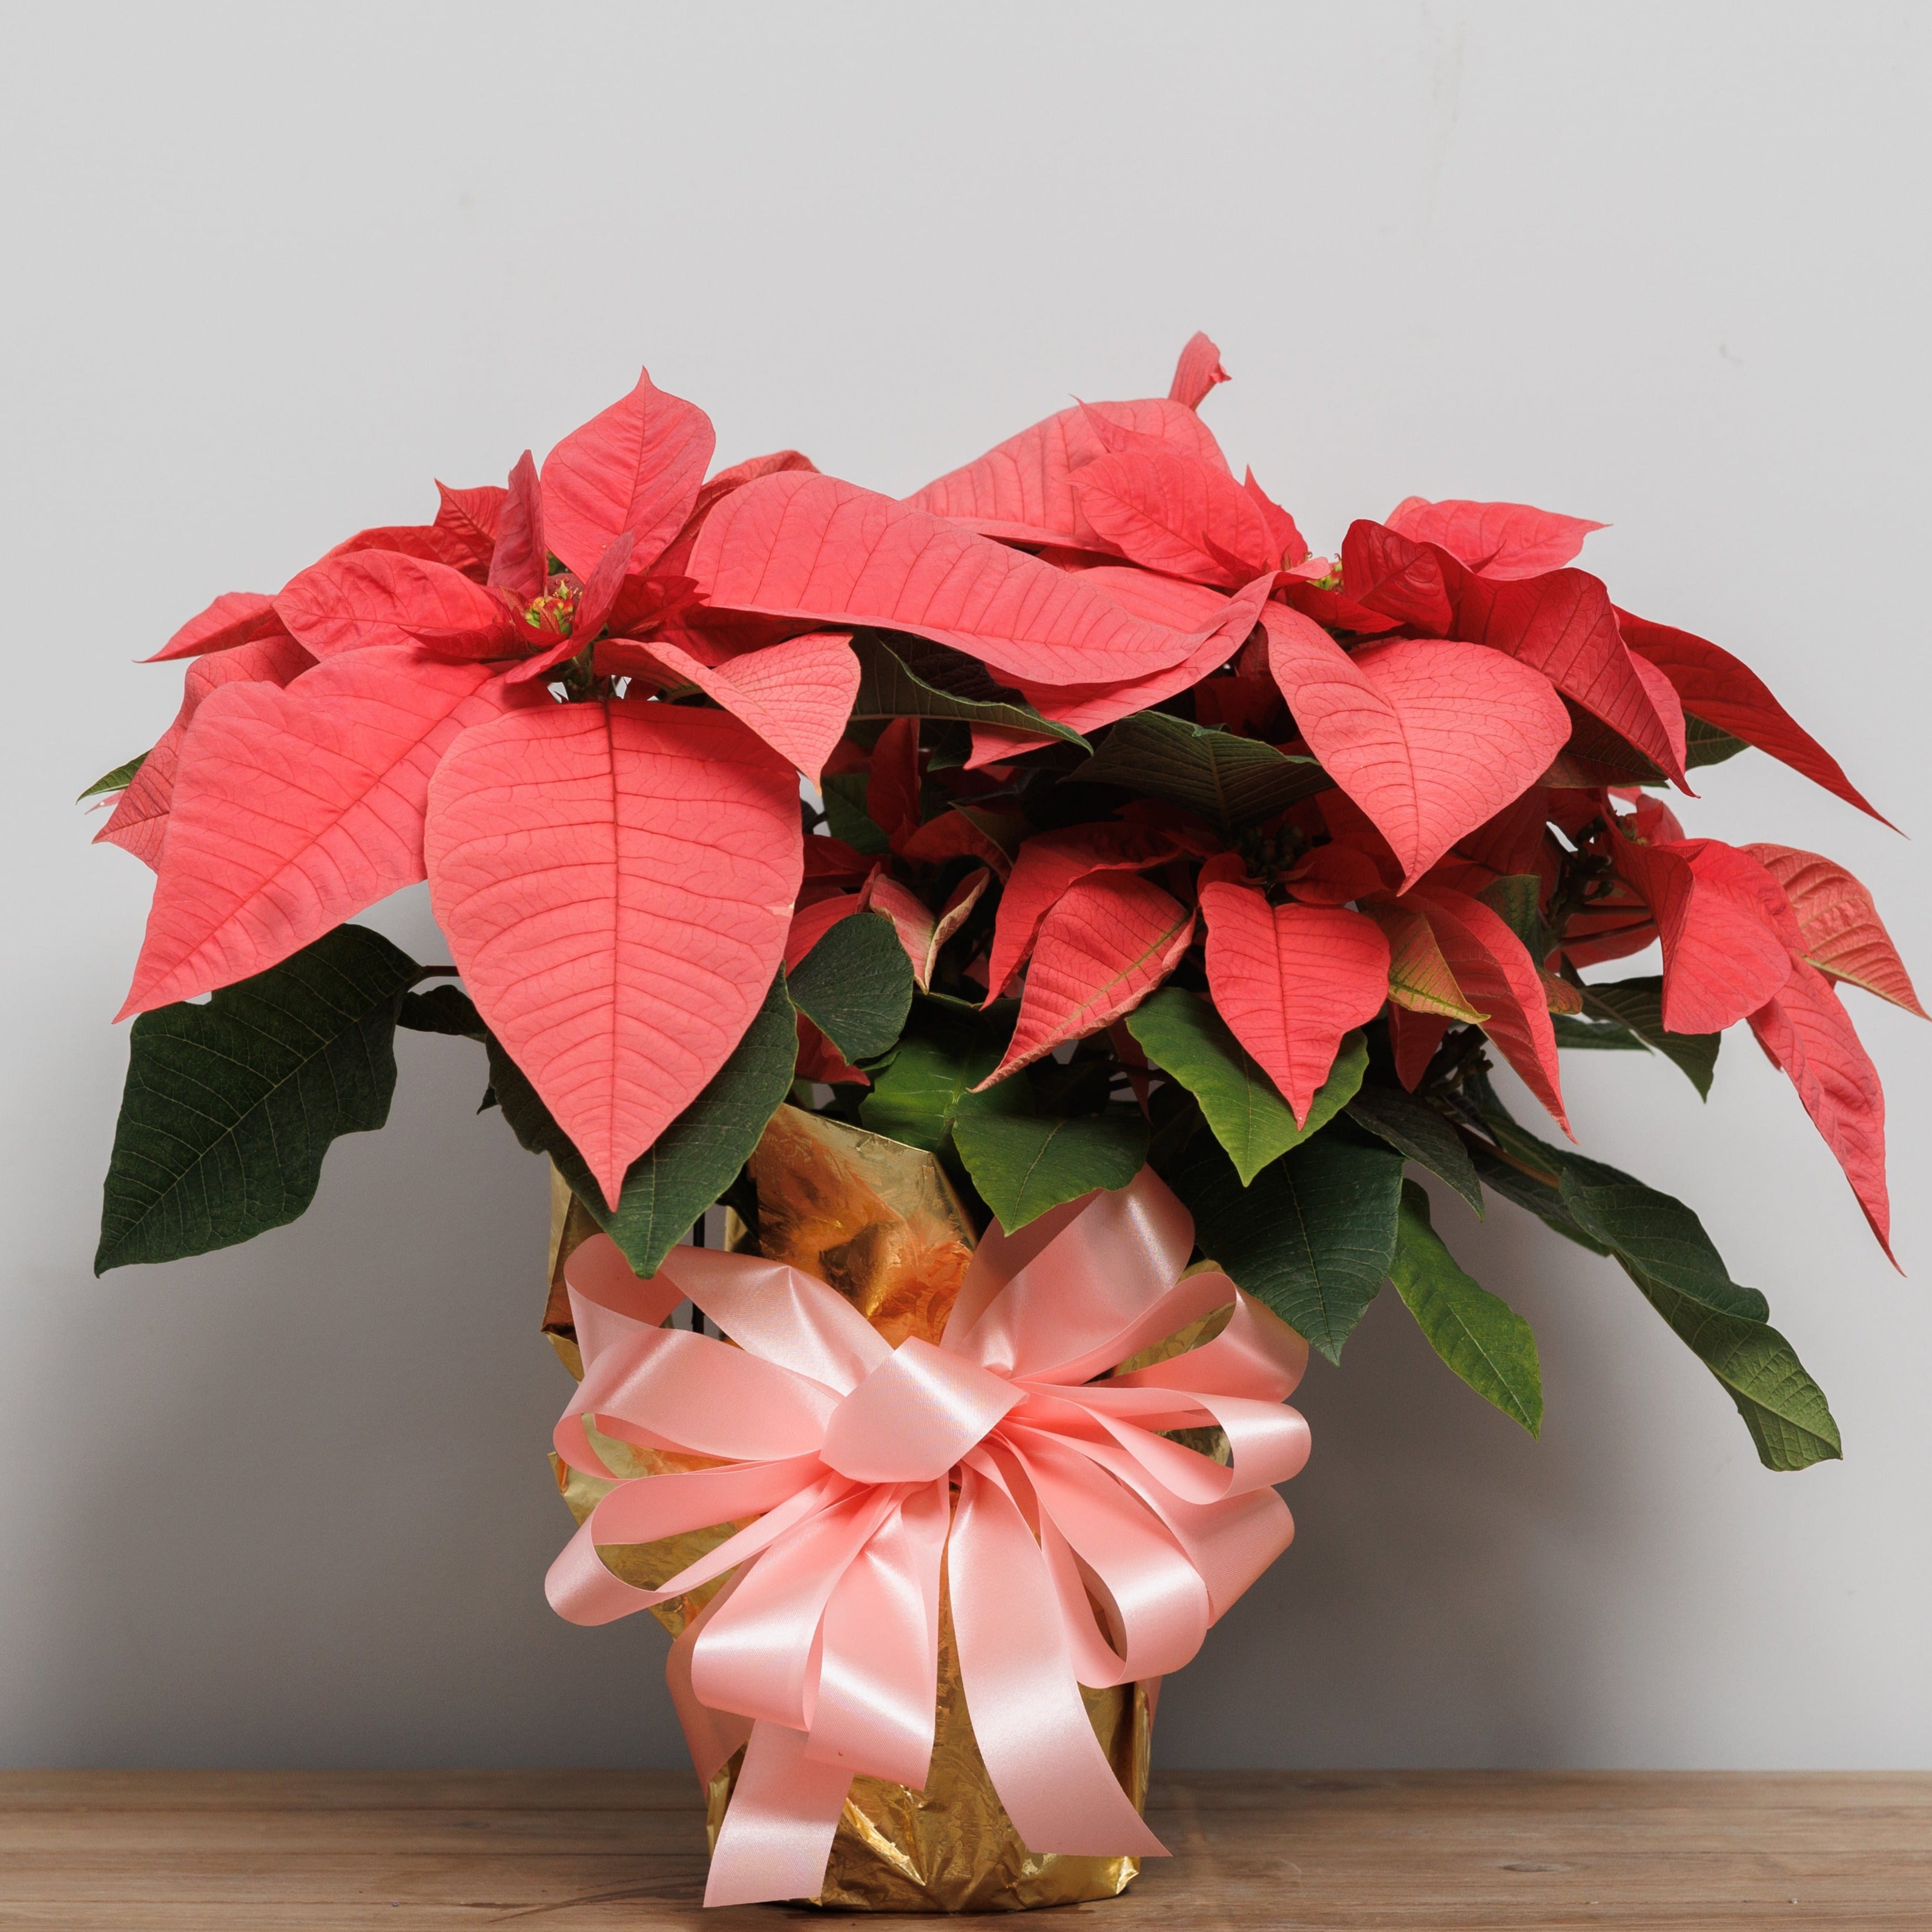 A pink poinsettia wrapped in gold foil with a pink bow.